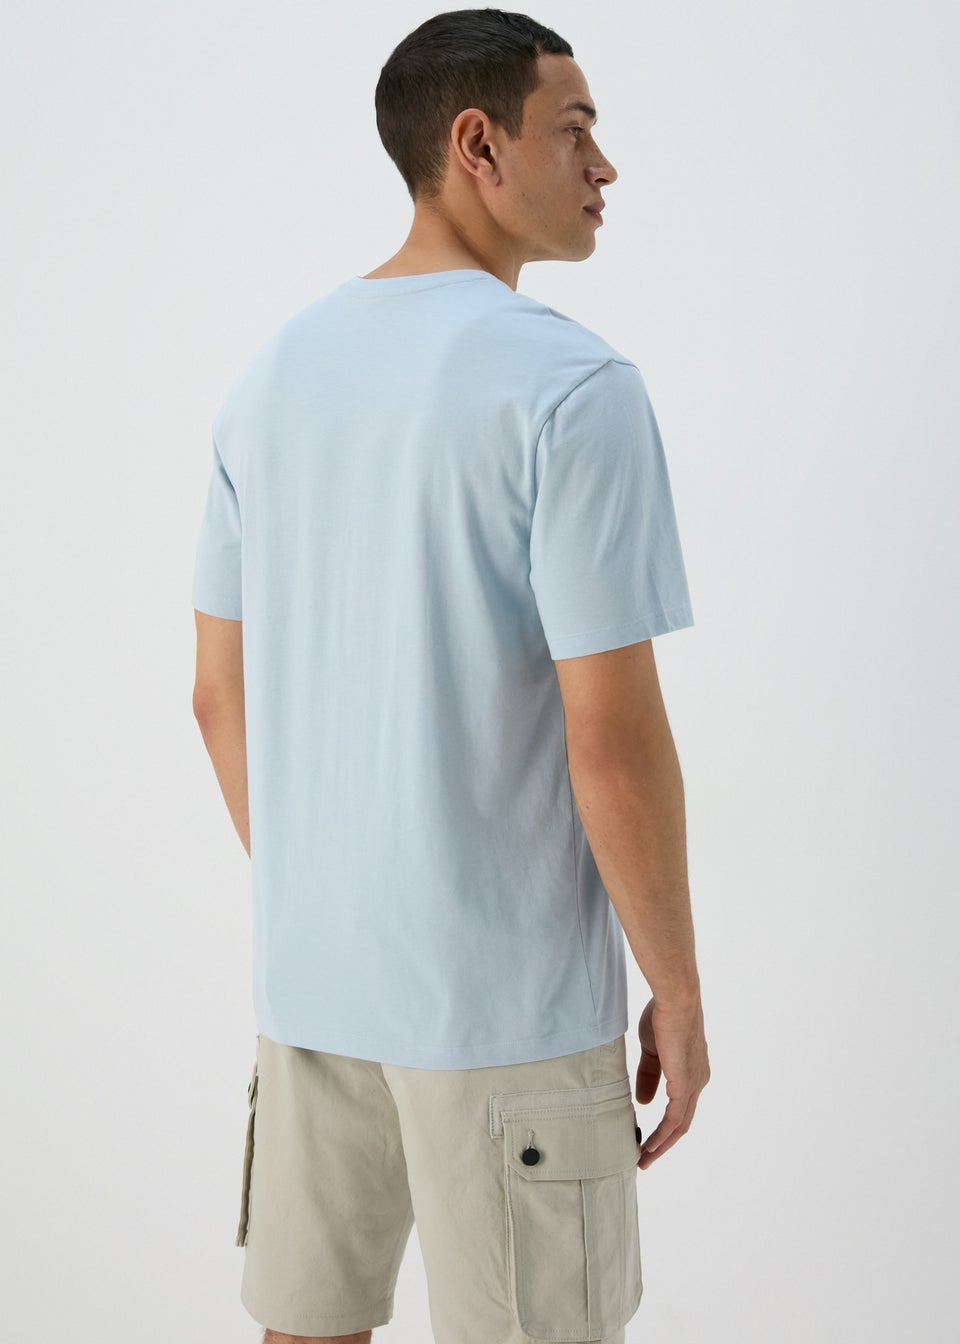 Light Blue Cycle Works T-Shirt